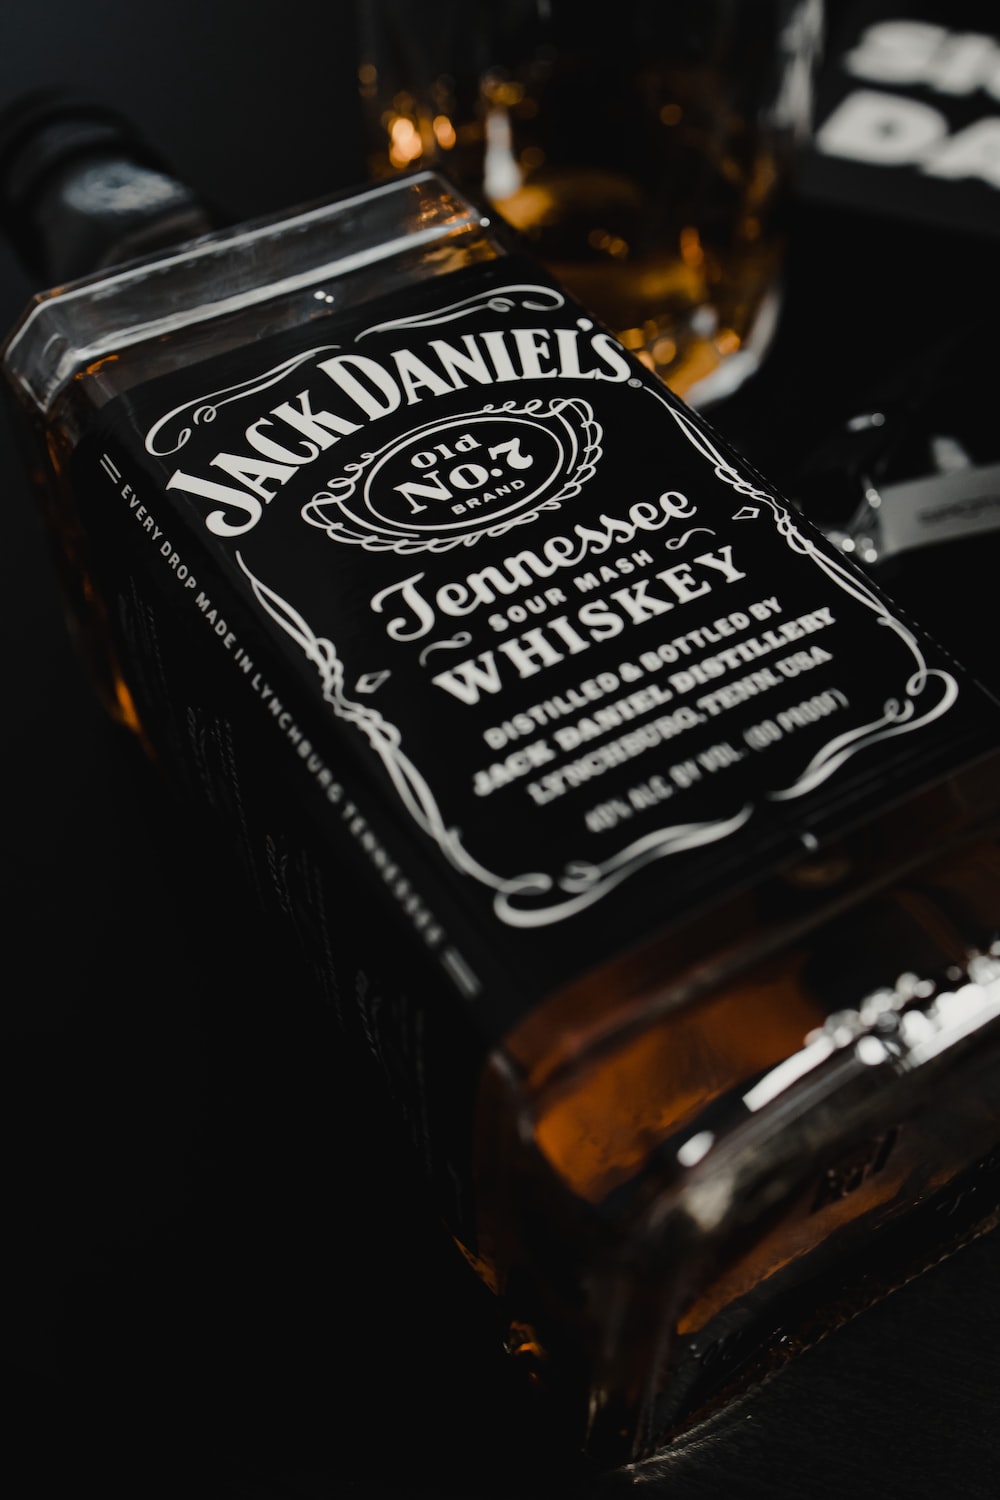 Jack daniels old no tennessee whiskey photo â free grey image on